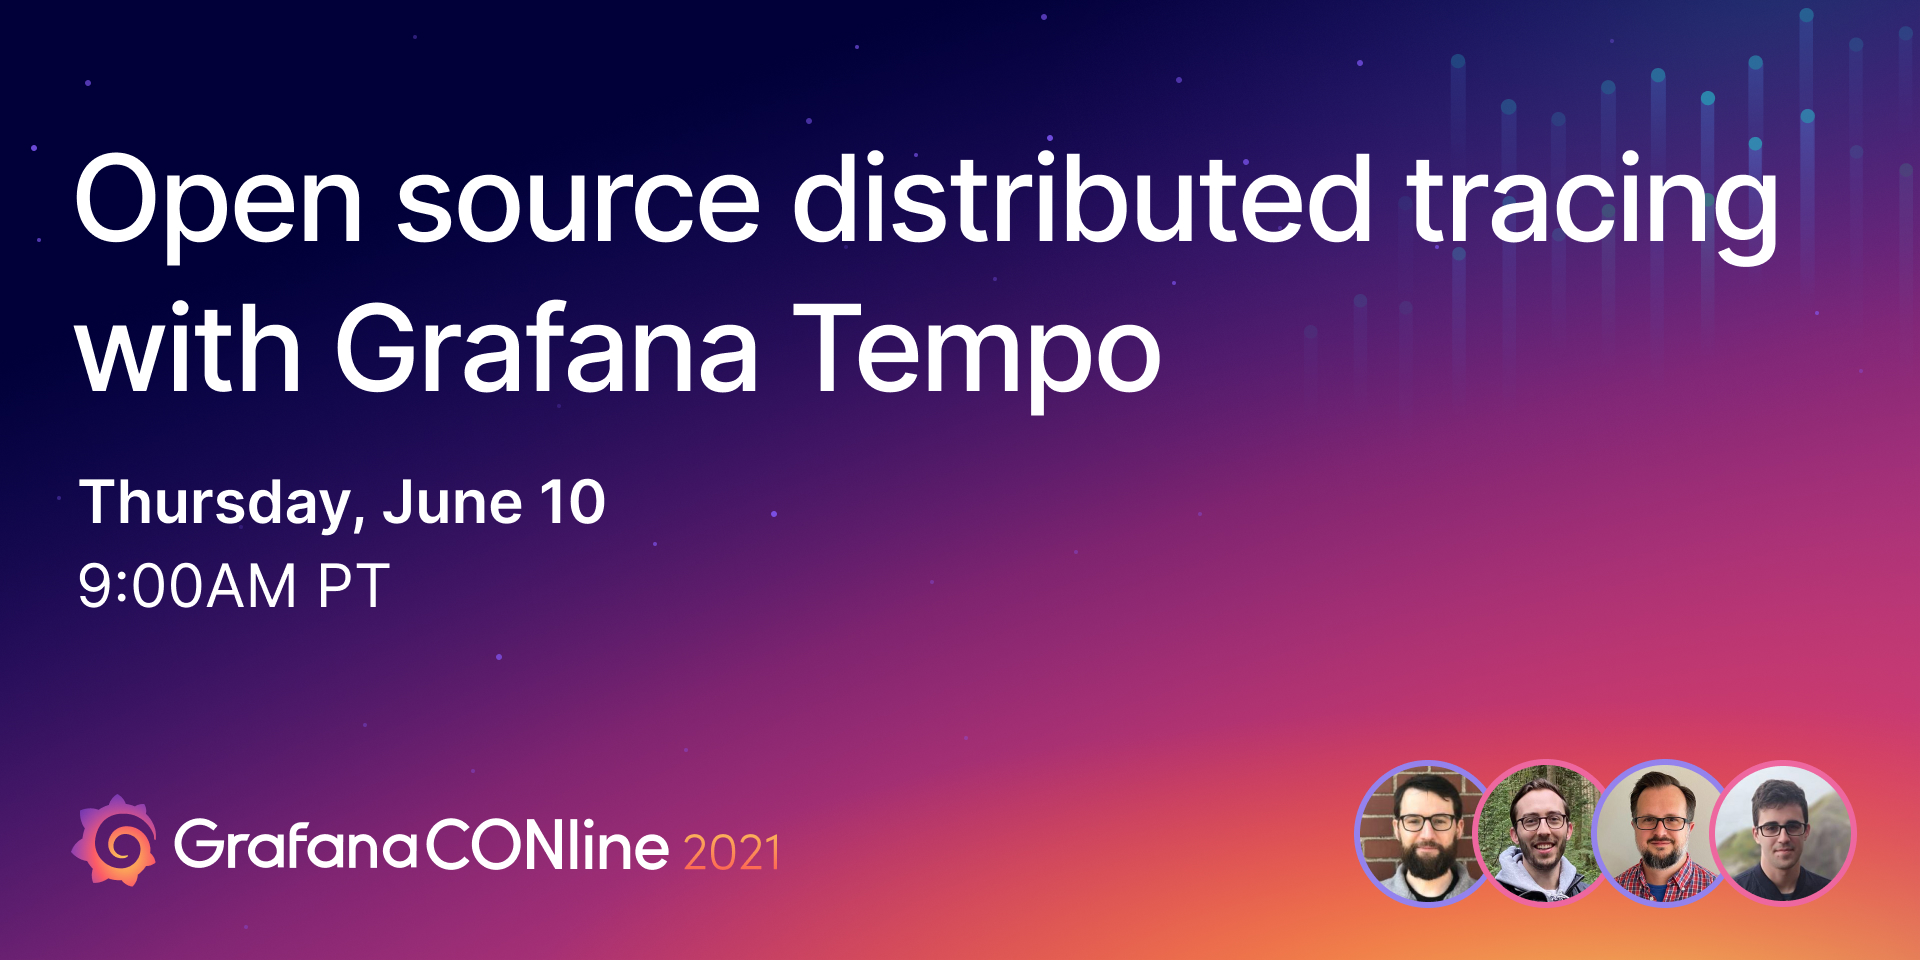 Open source distributed tracing with Grafana Tempo